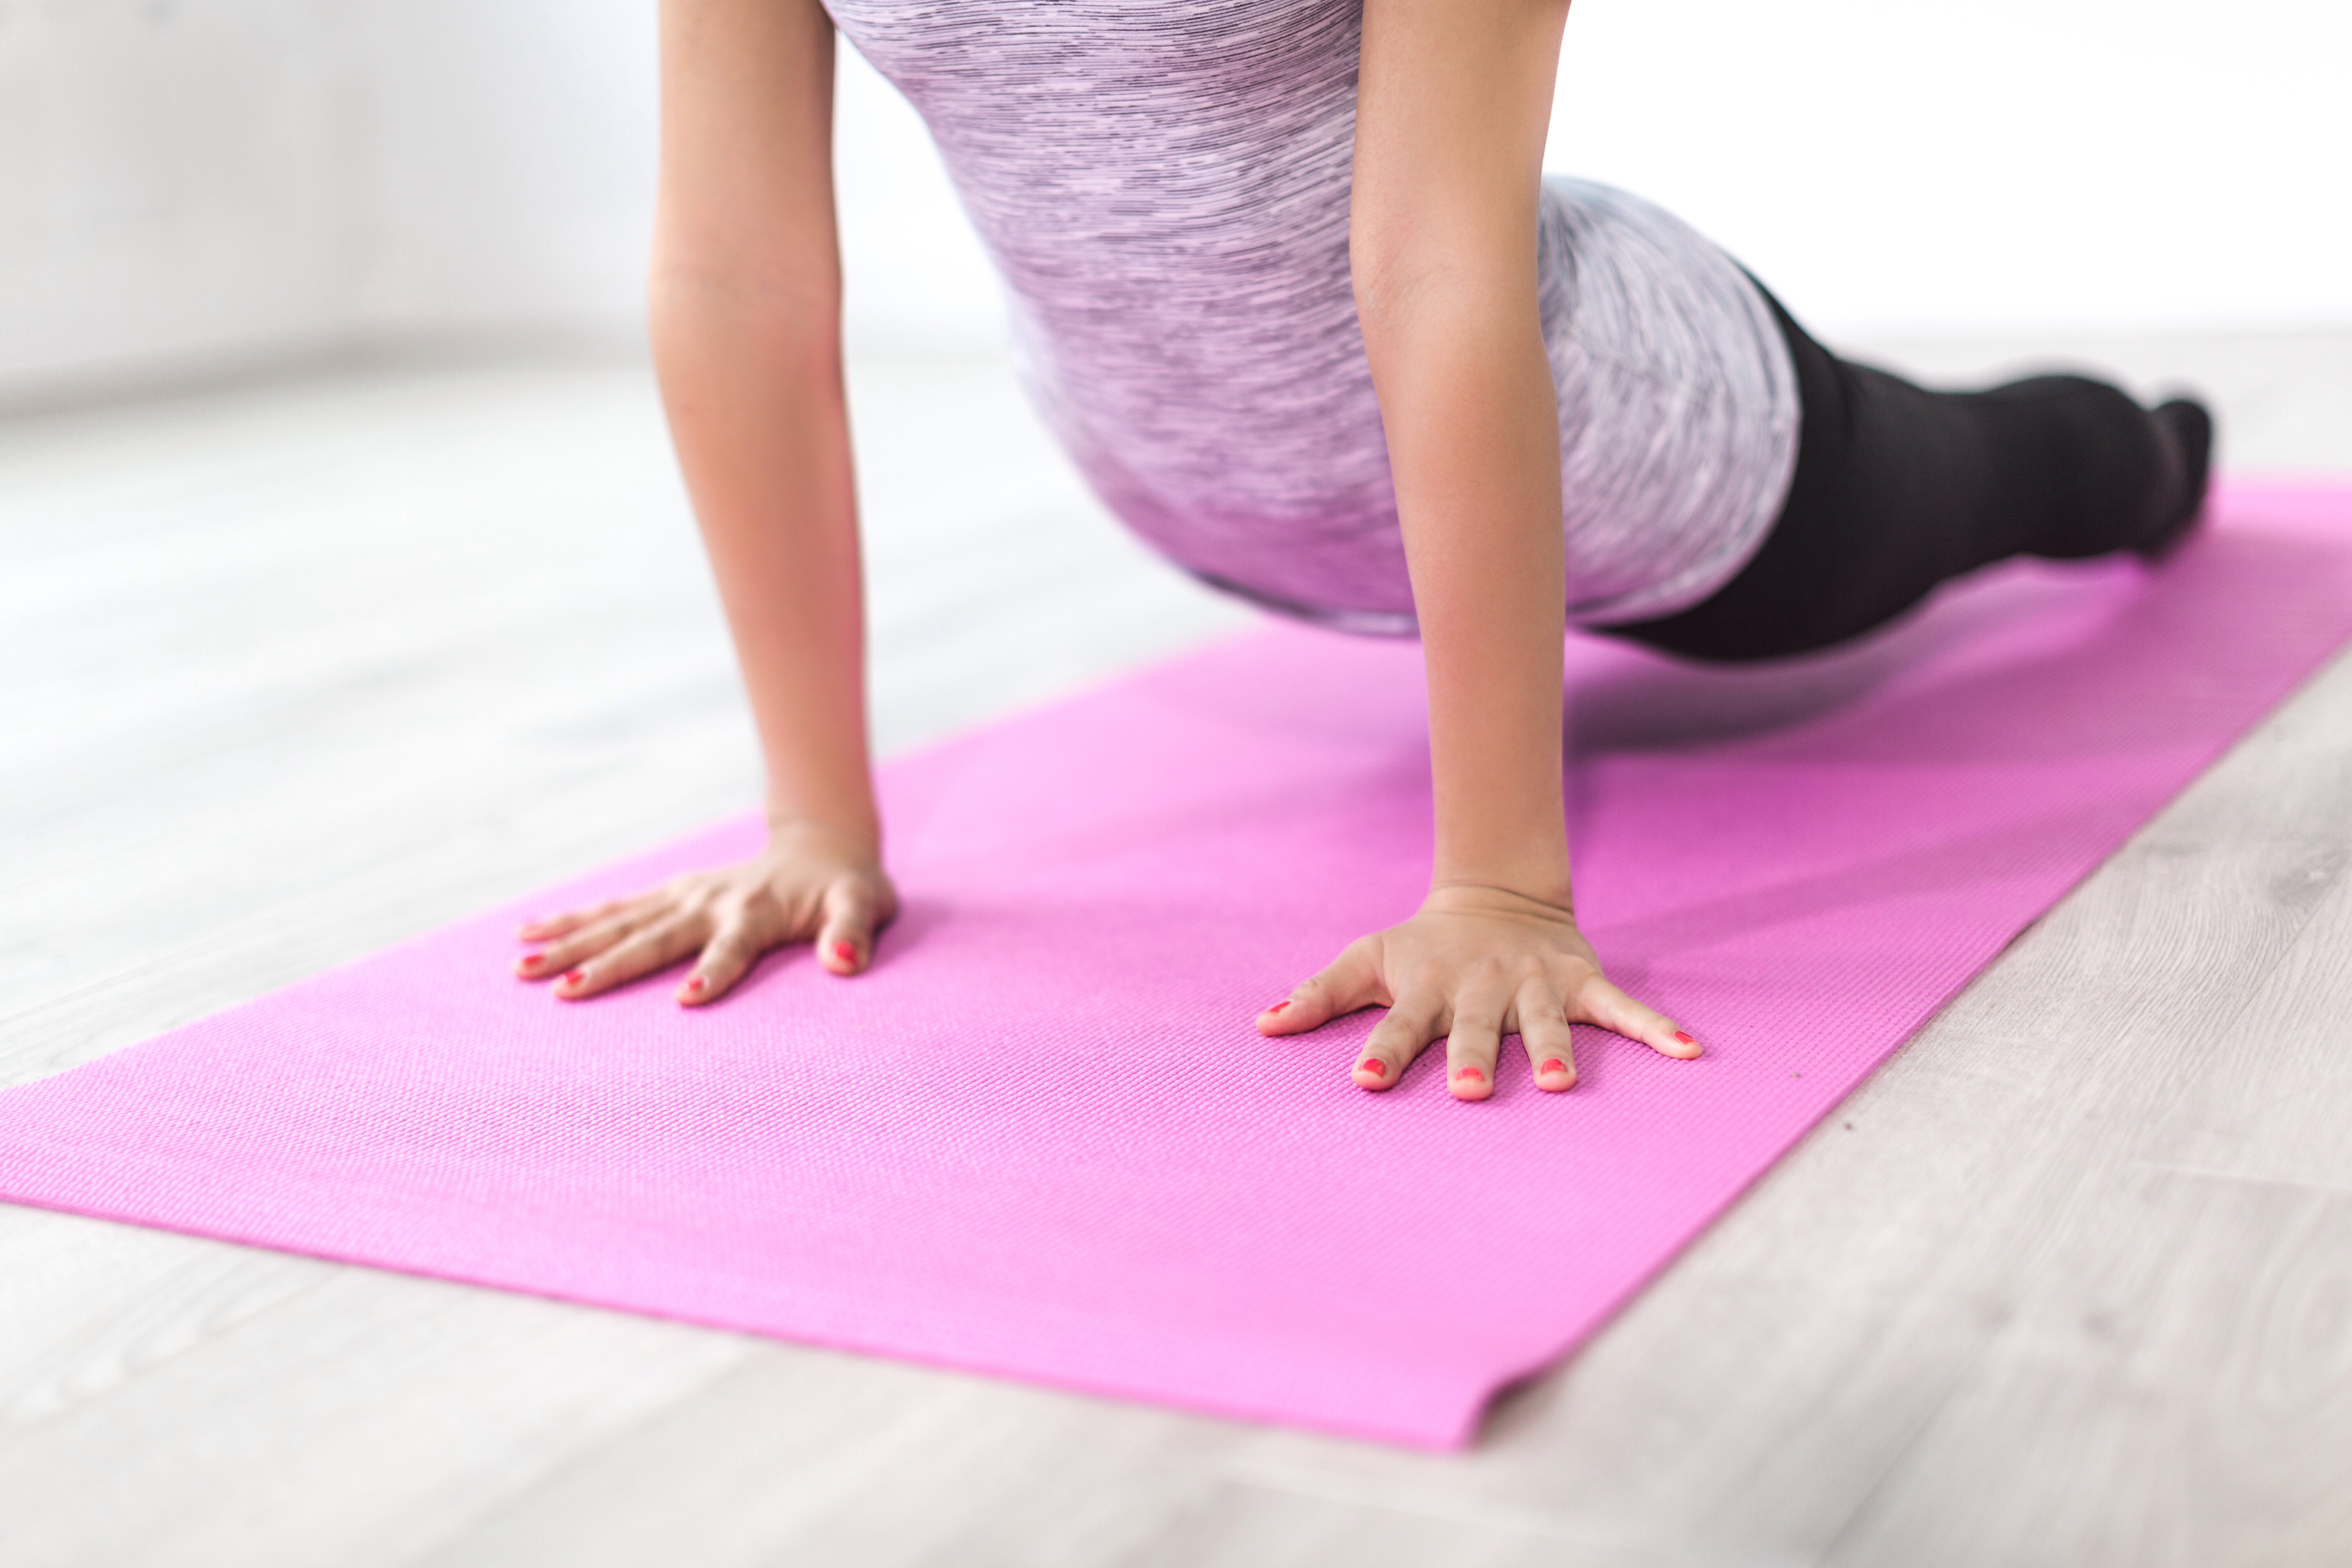 Image of a girl exercising on a yoga mat.